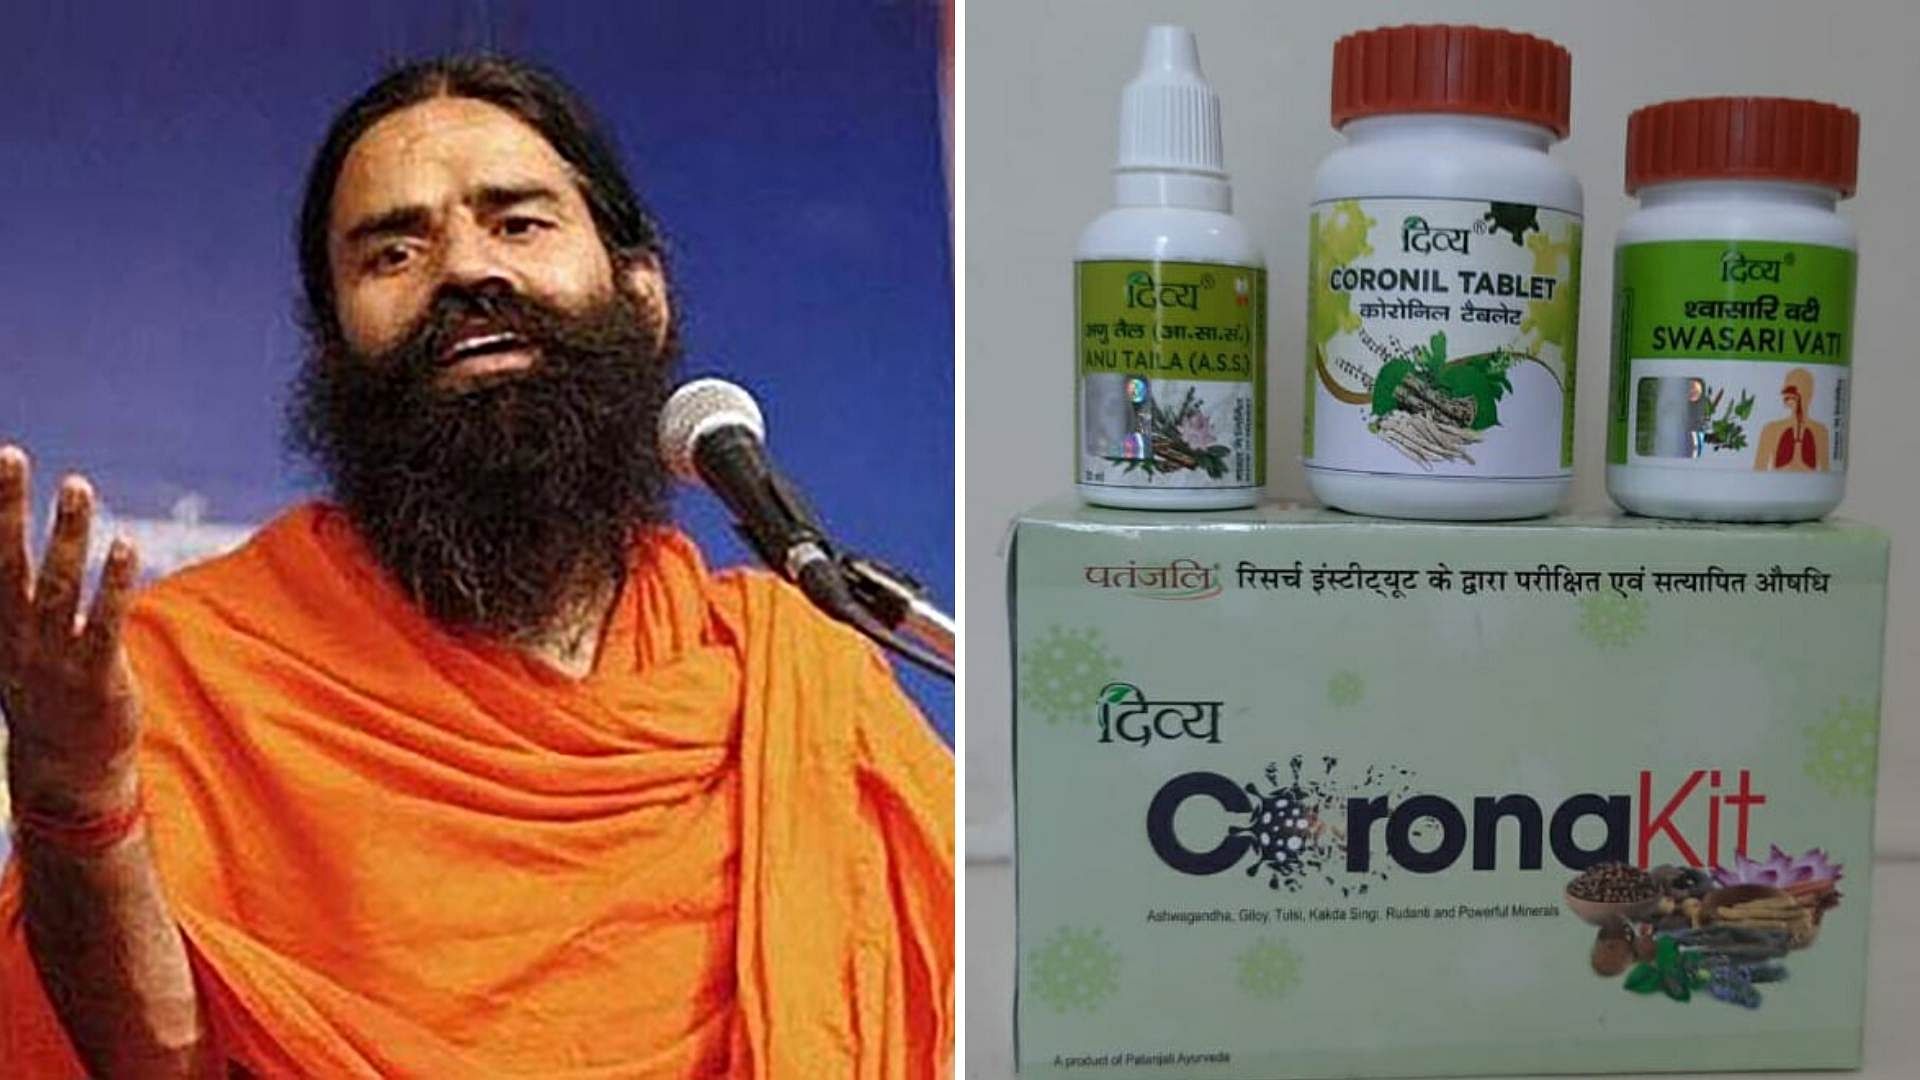 Facing flak over its ‘COVID-19 drug’, Patanjali claimed it “Has done all the legal compliance”